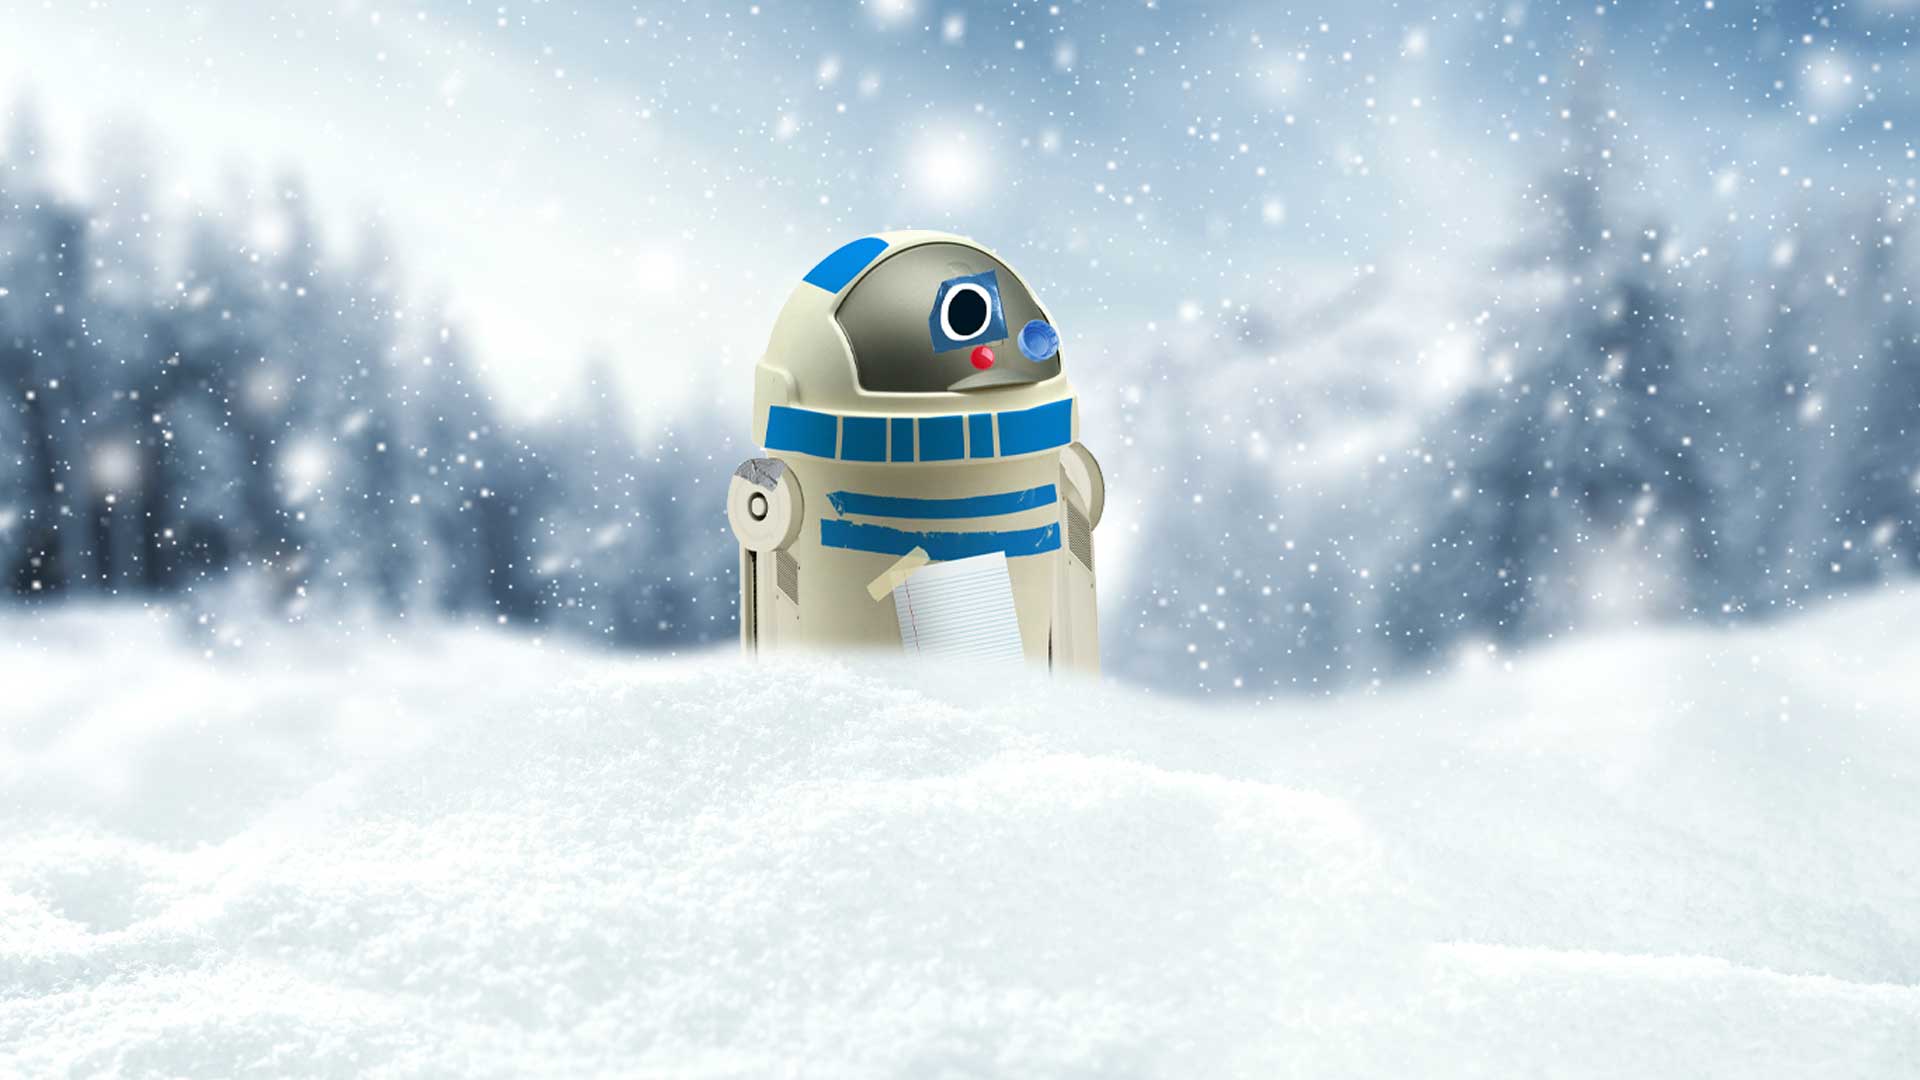 A Star Wars character in a snowy environment 